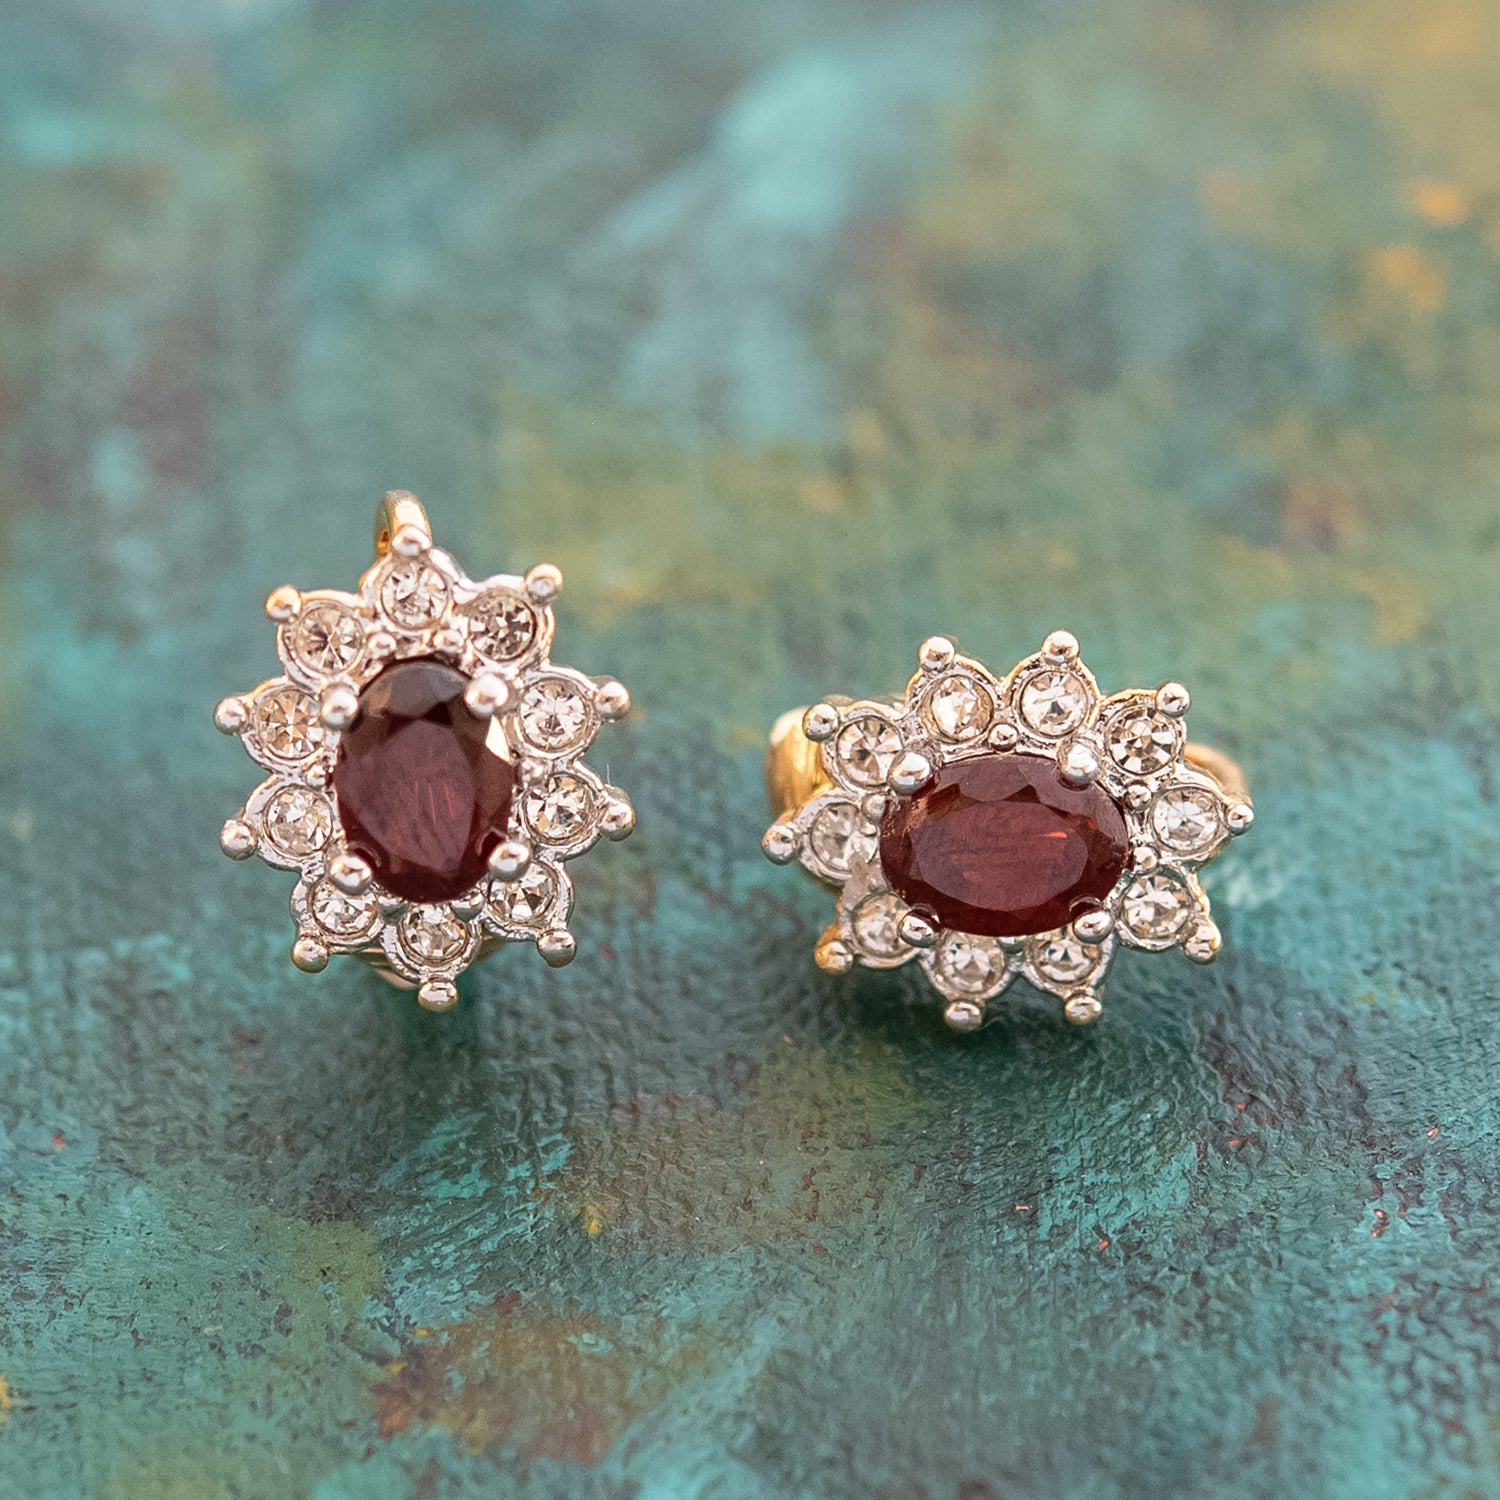 Vintage Genuine Garnet Surrounded by Austrian Crystal Clip Earrings 18k Yellow Gold Electroplated